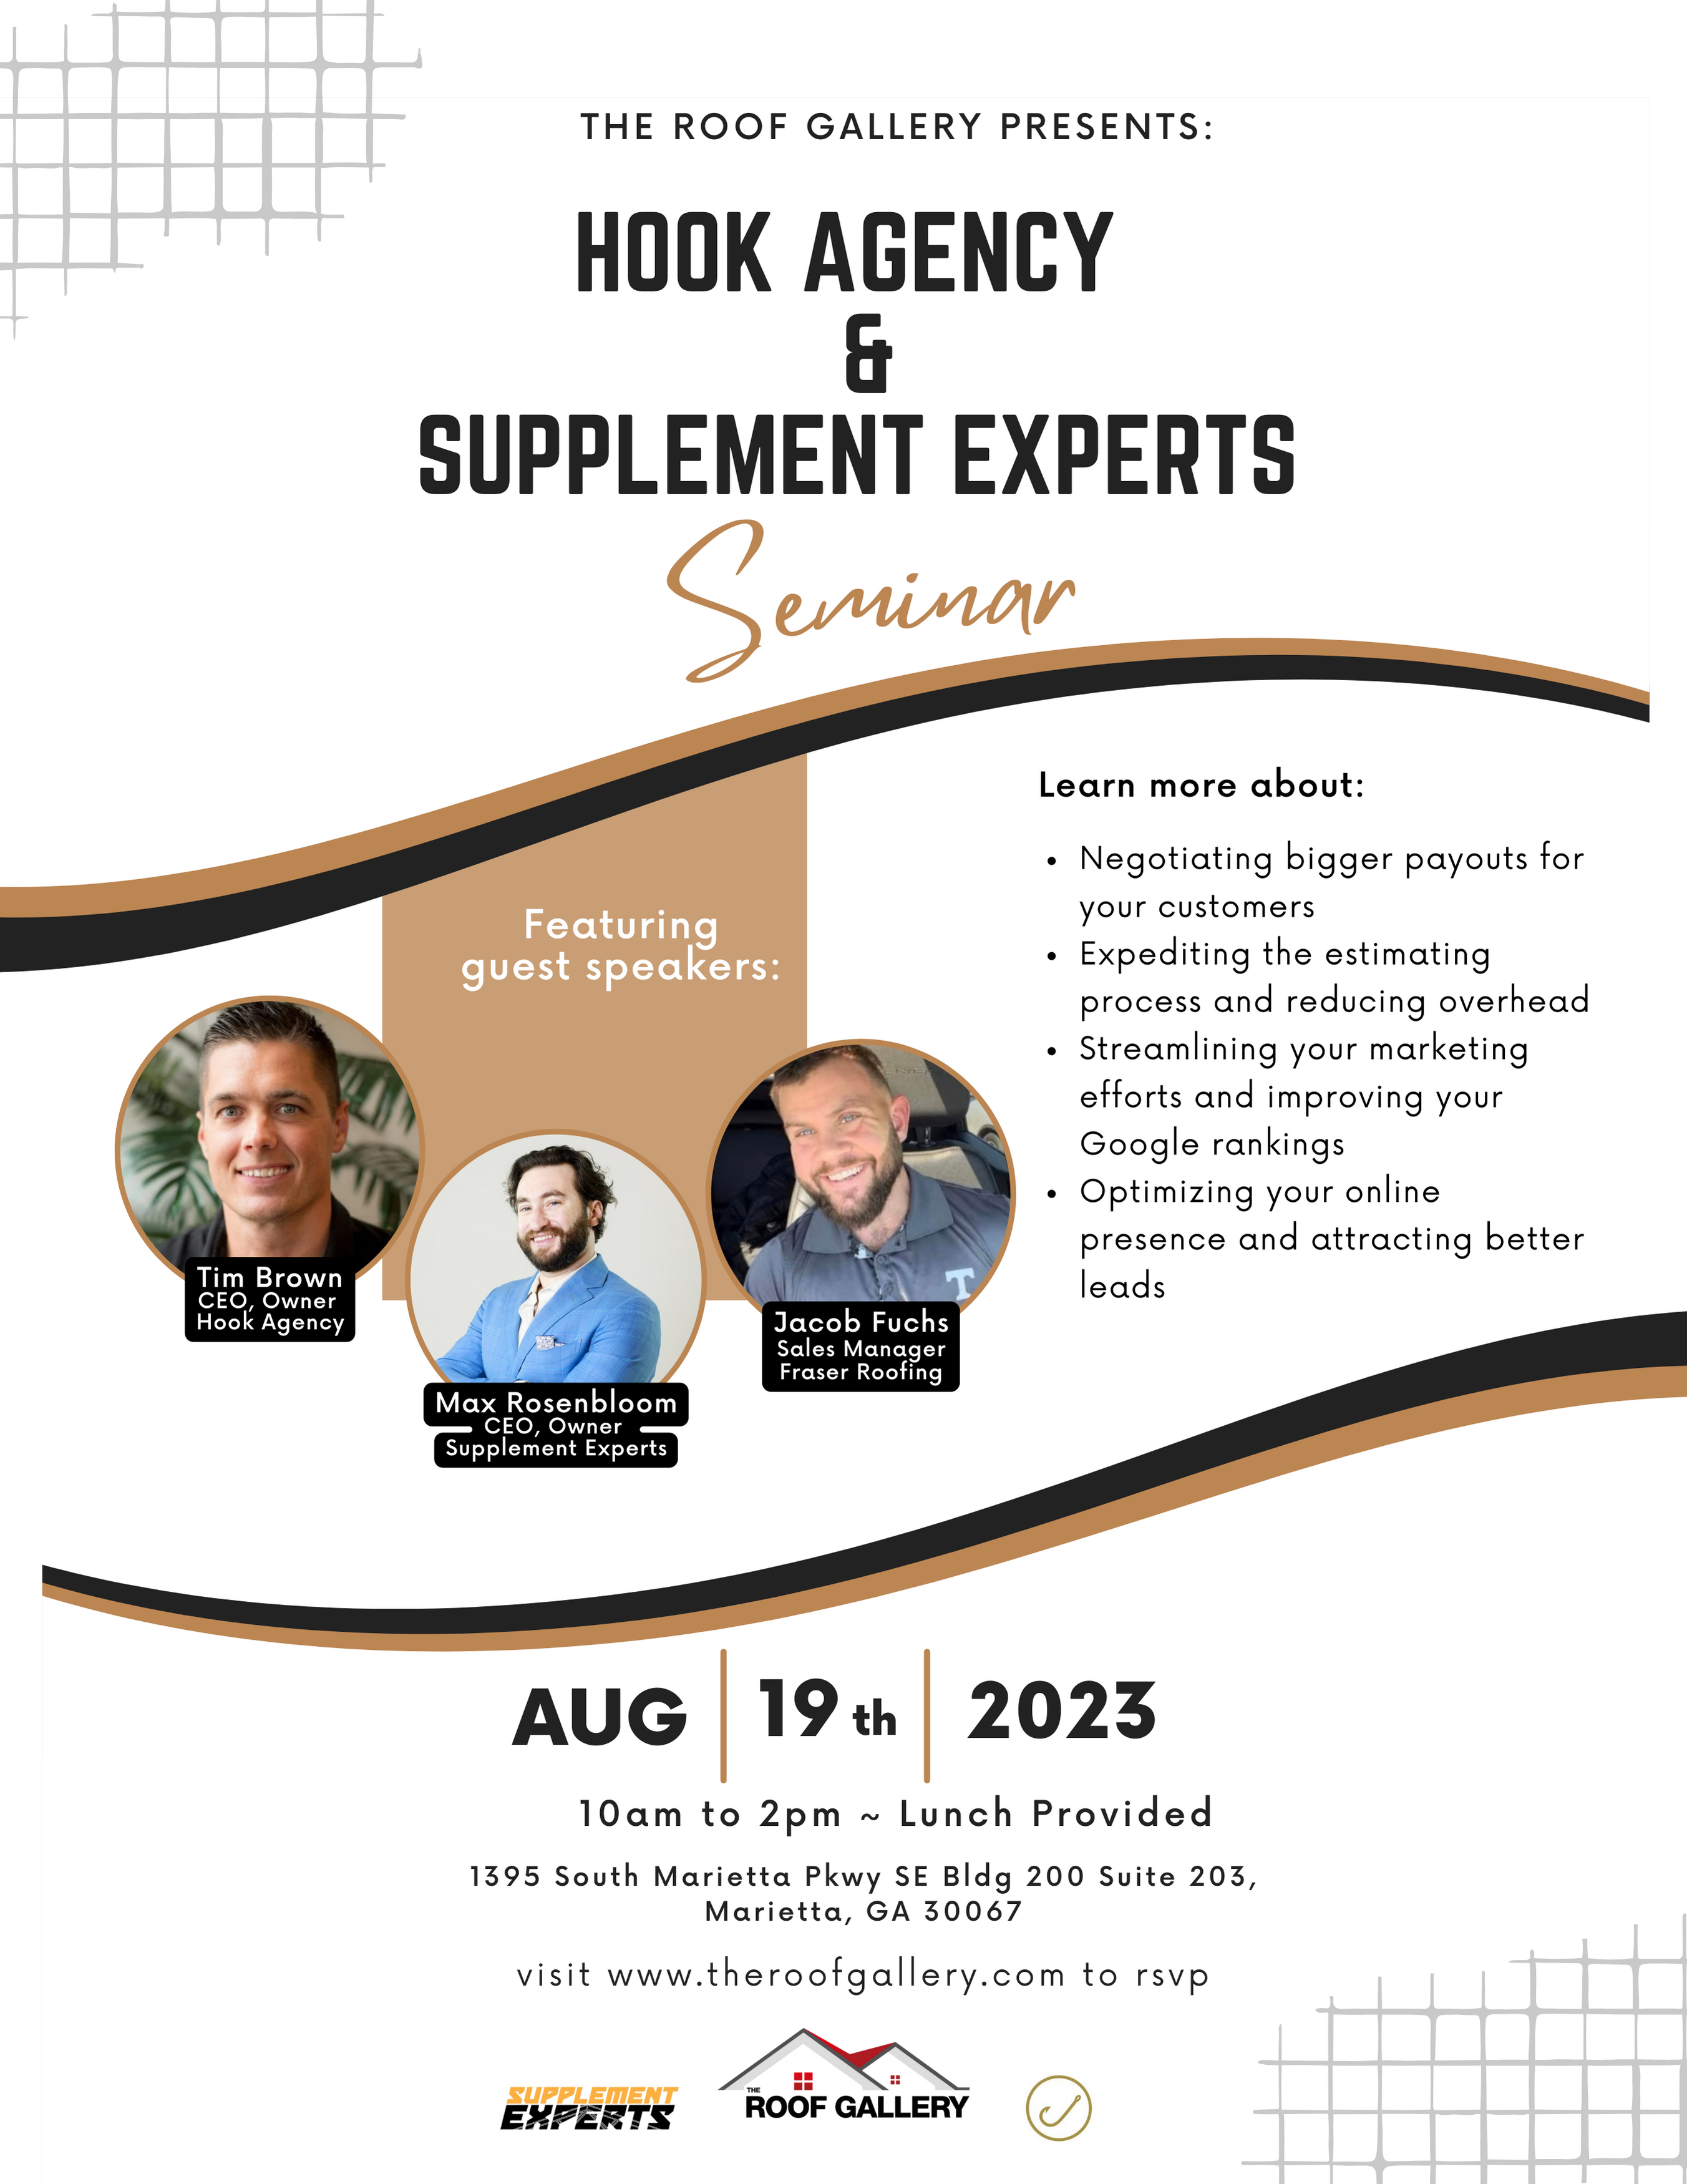 The Roof Gallery Presents: Hook Agency and Supplement Experts Seminar